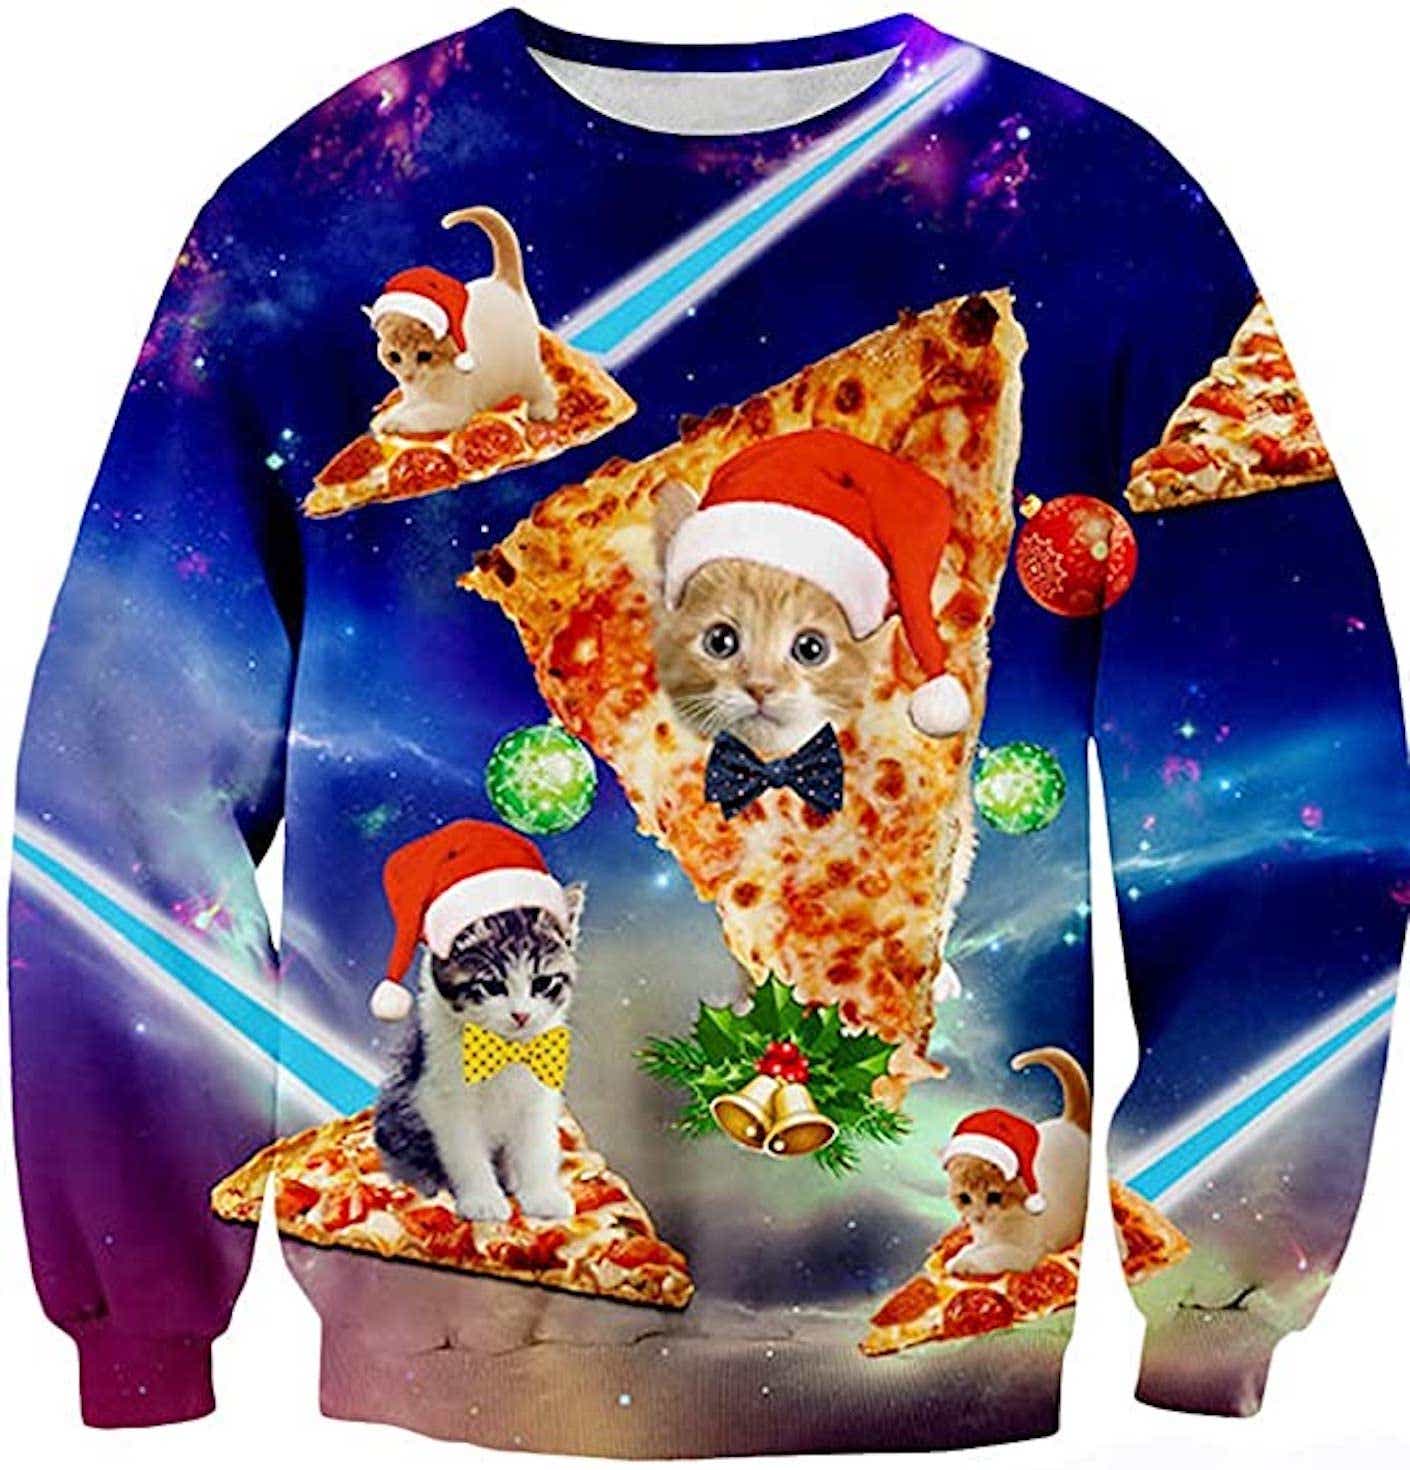 Funny ugly holiday sweater including cats and pizza